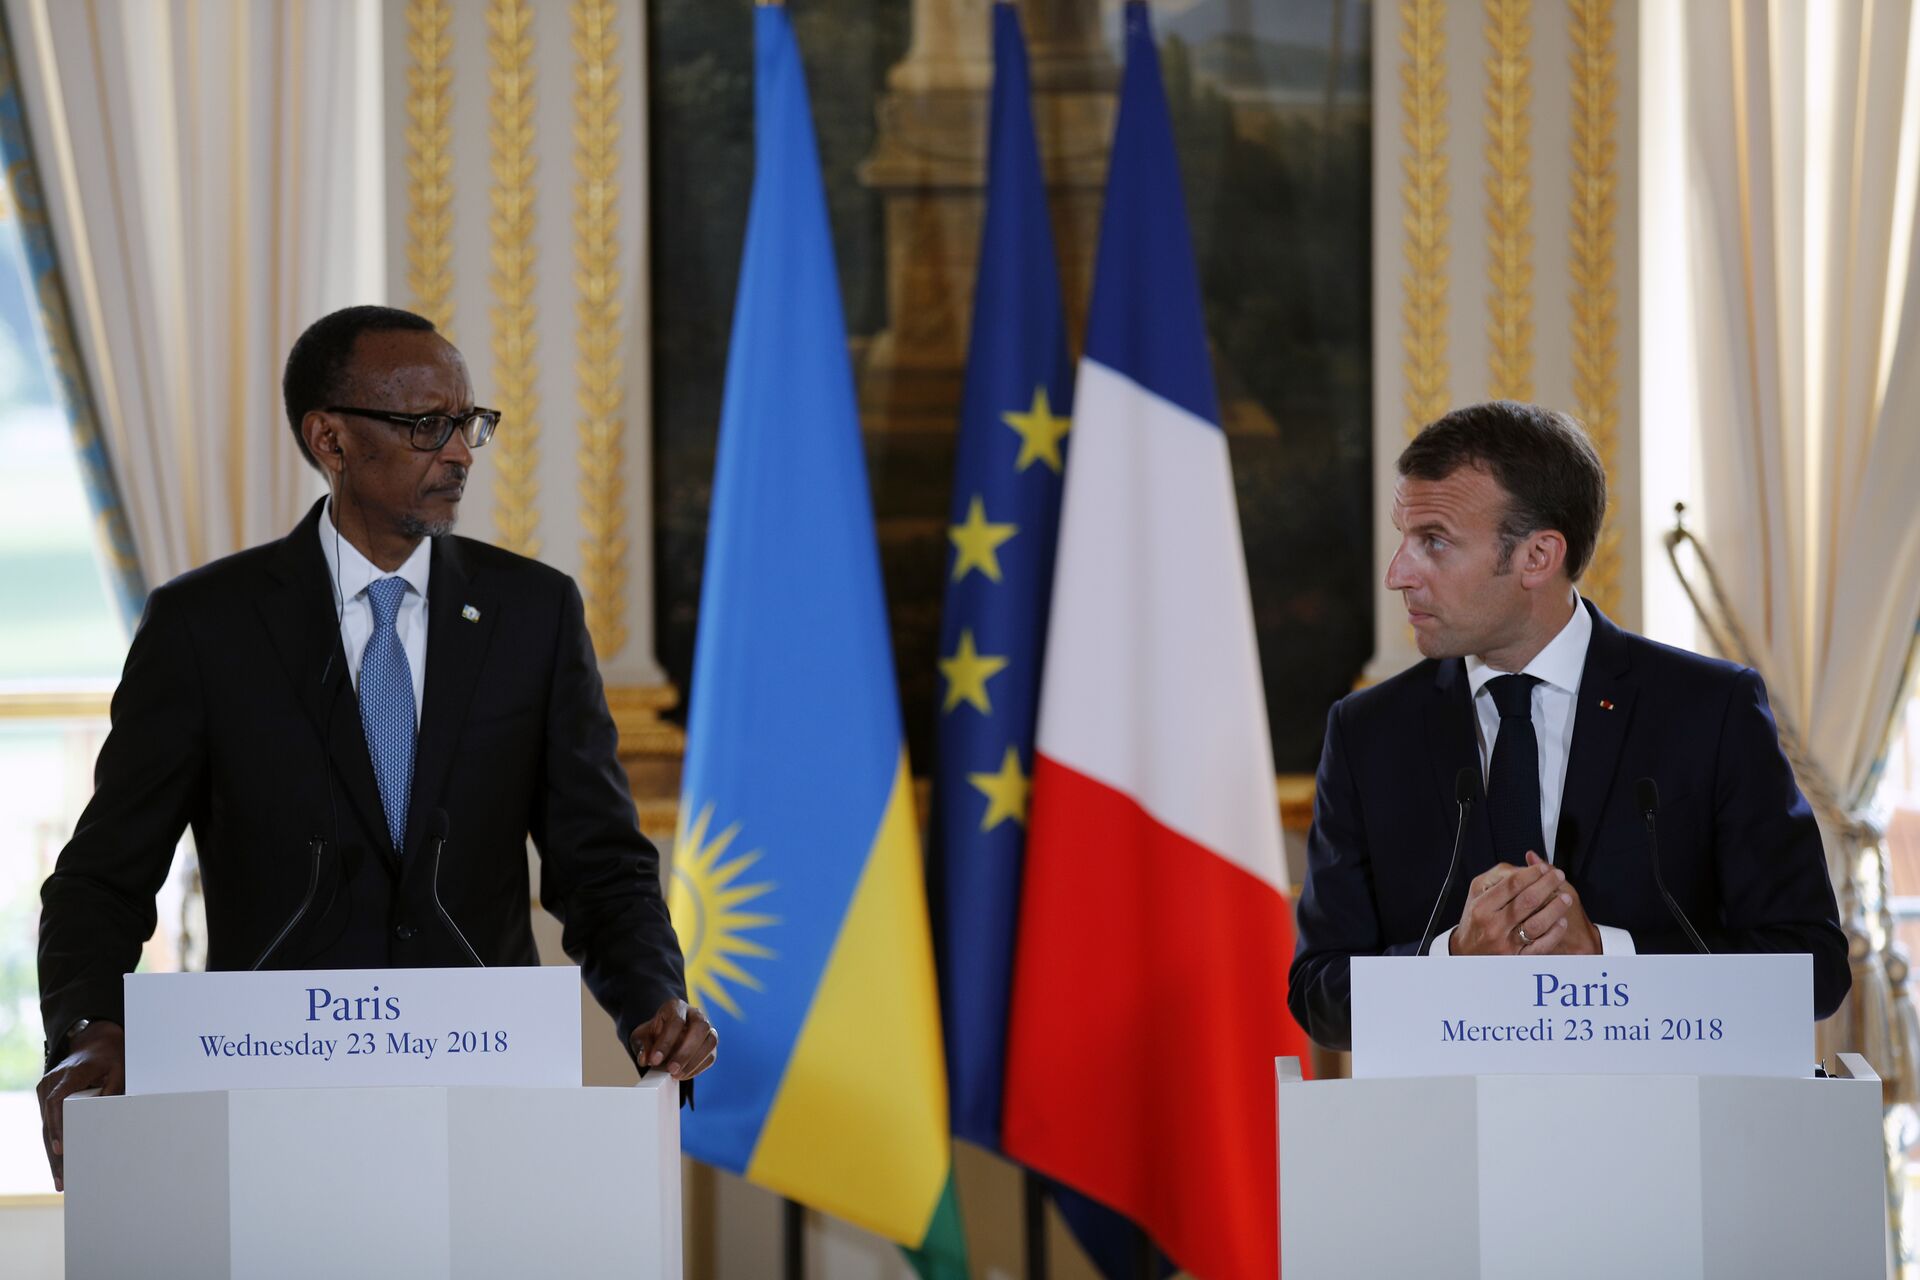 President Emmanuel Macron of France hosted Rwanda's President Kagame at the Elysee Palace last year as he sought to thaw relations - Sputnik International, 1920, 05.07.2022